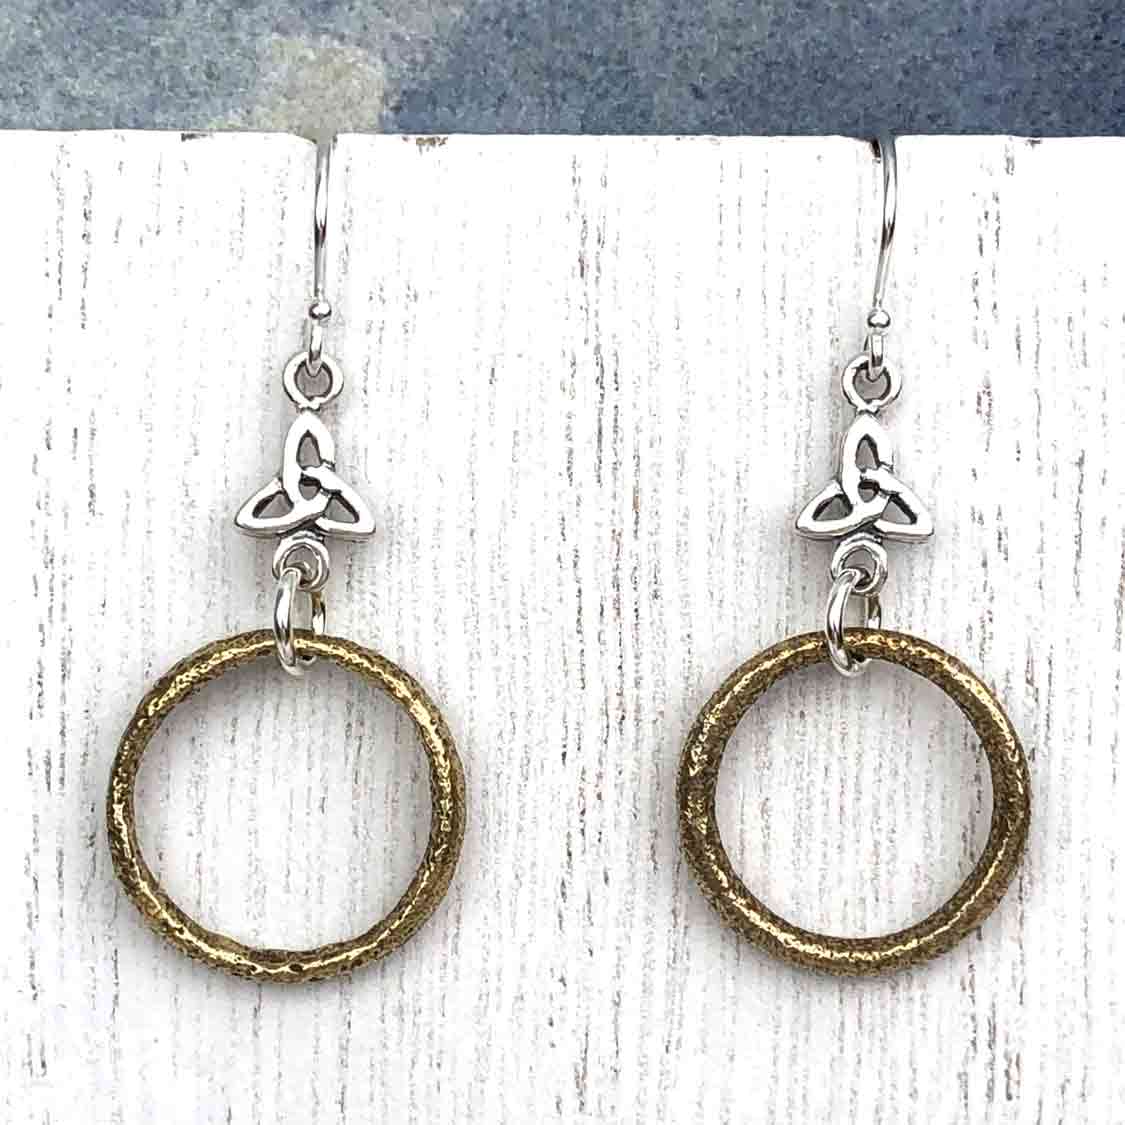 Warm Golden Bronze Celtic Ring Money Earrings with Trinity Knot Charm